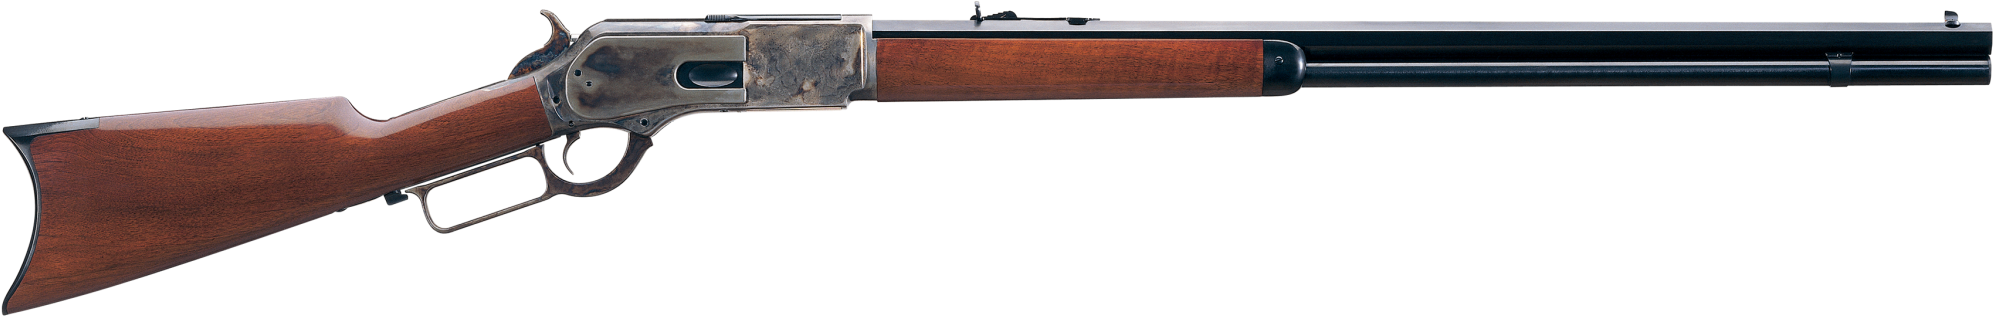 Winchester Model 1876 Repeating Rifle, “centennial” - 45 75 Winchester Repeater (2000x357)